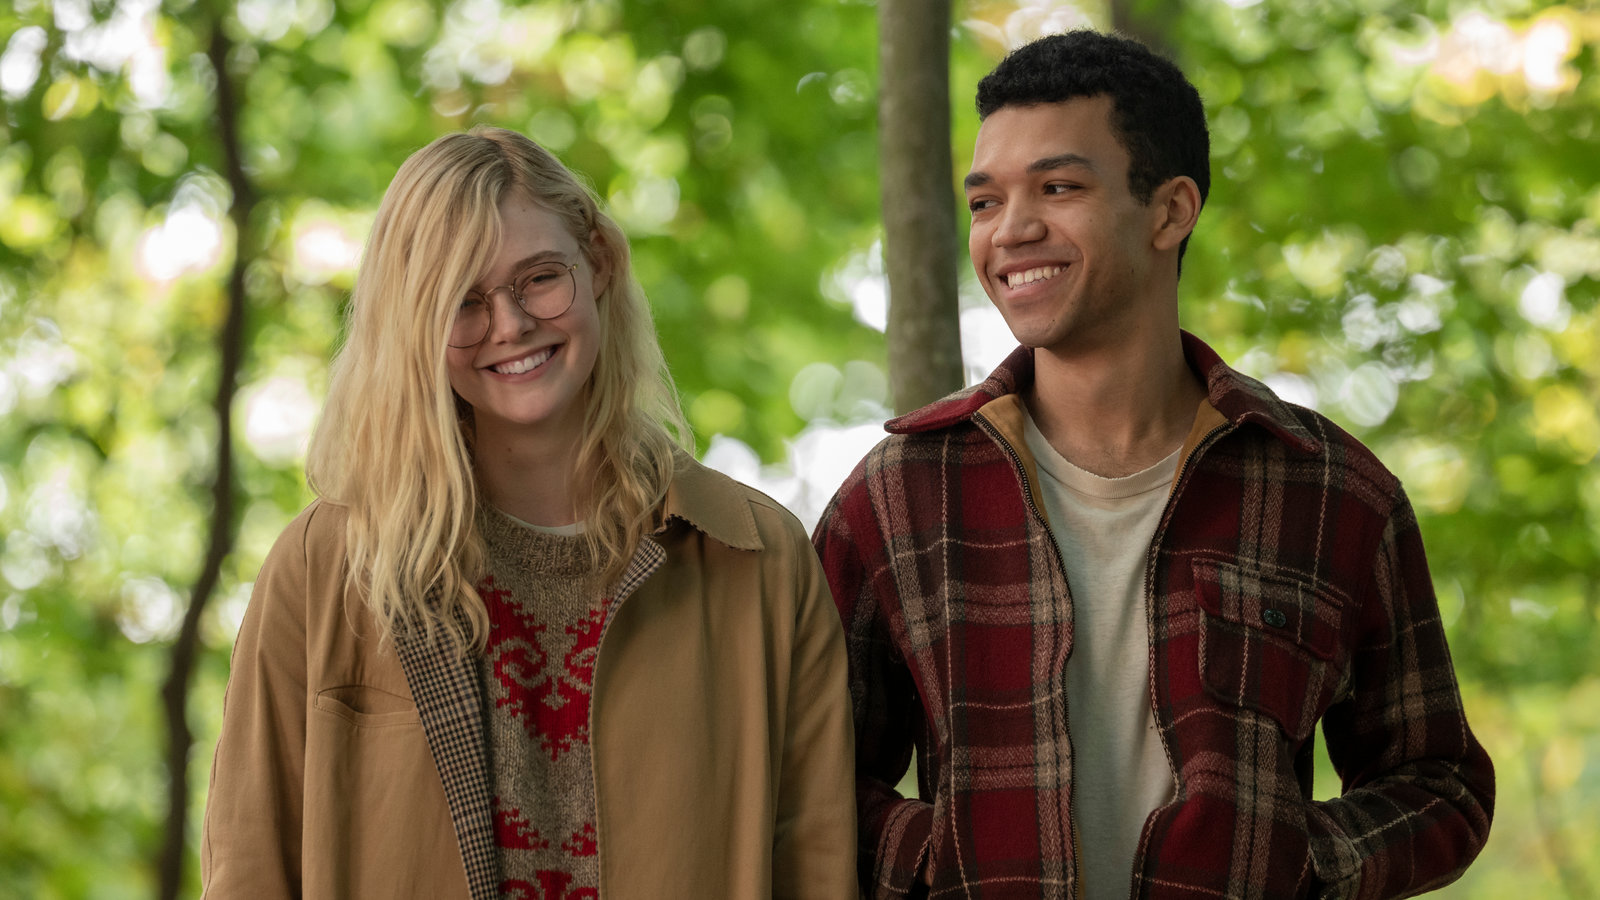 Please watch with caution': All the Bright Places viewers urge Netflix to add trigger warning